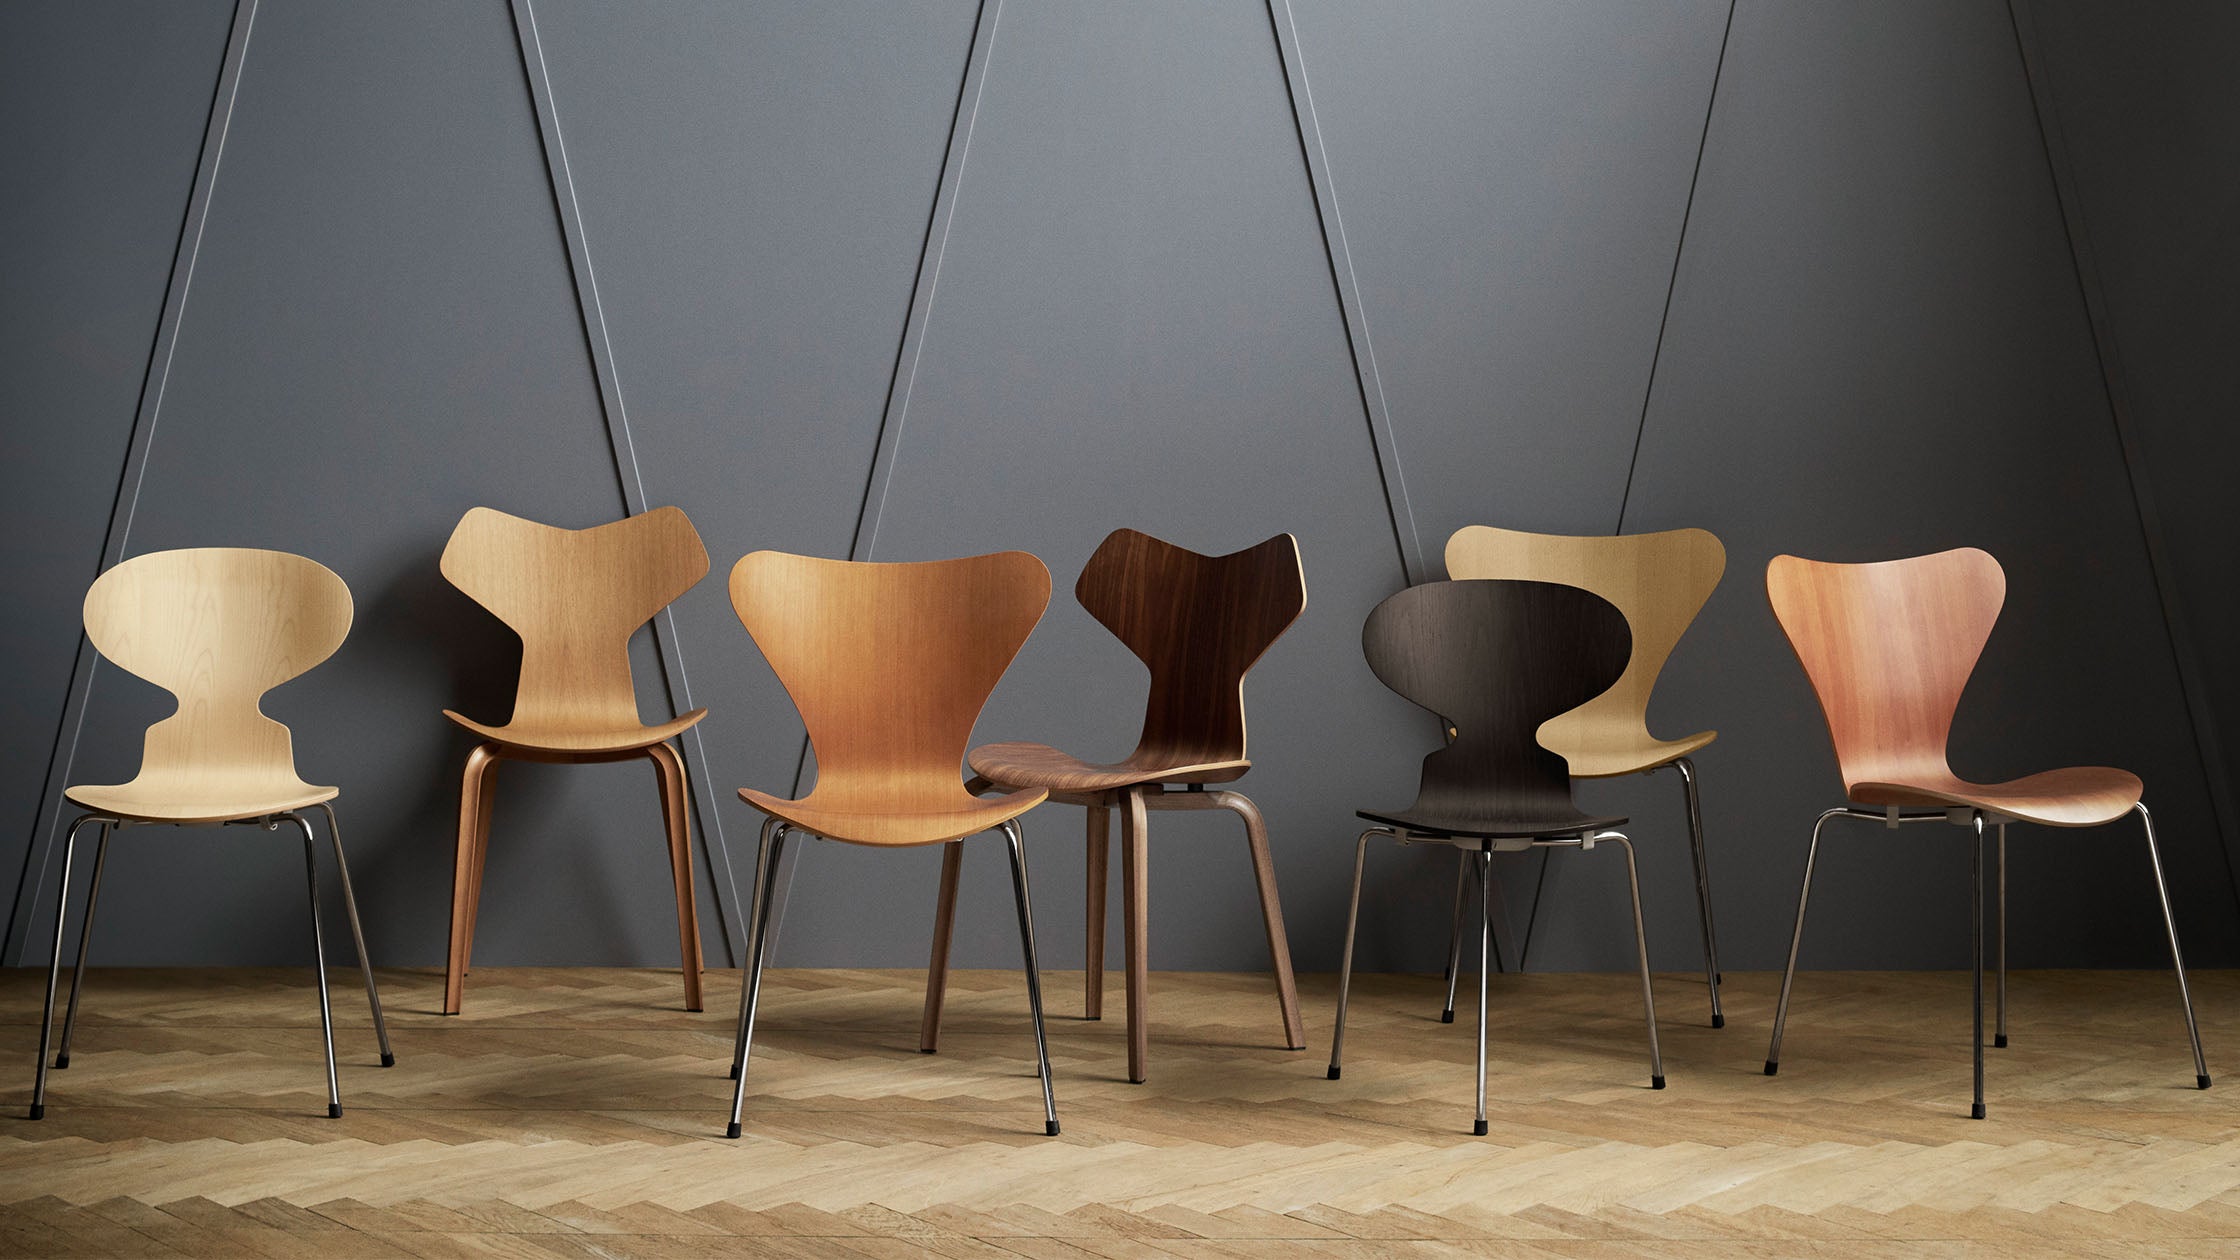 6-for-5: Arne Jacobsen Stacking Chairs